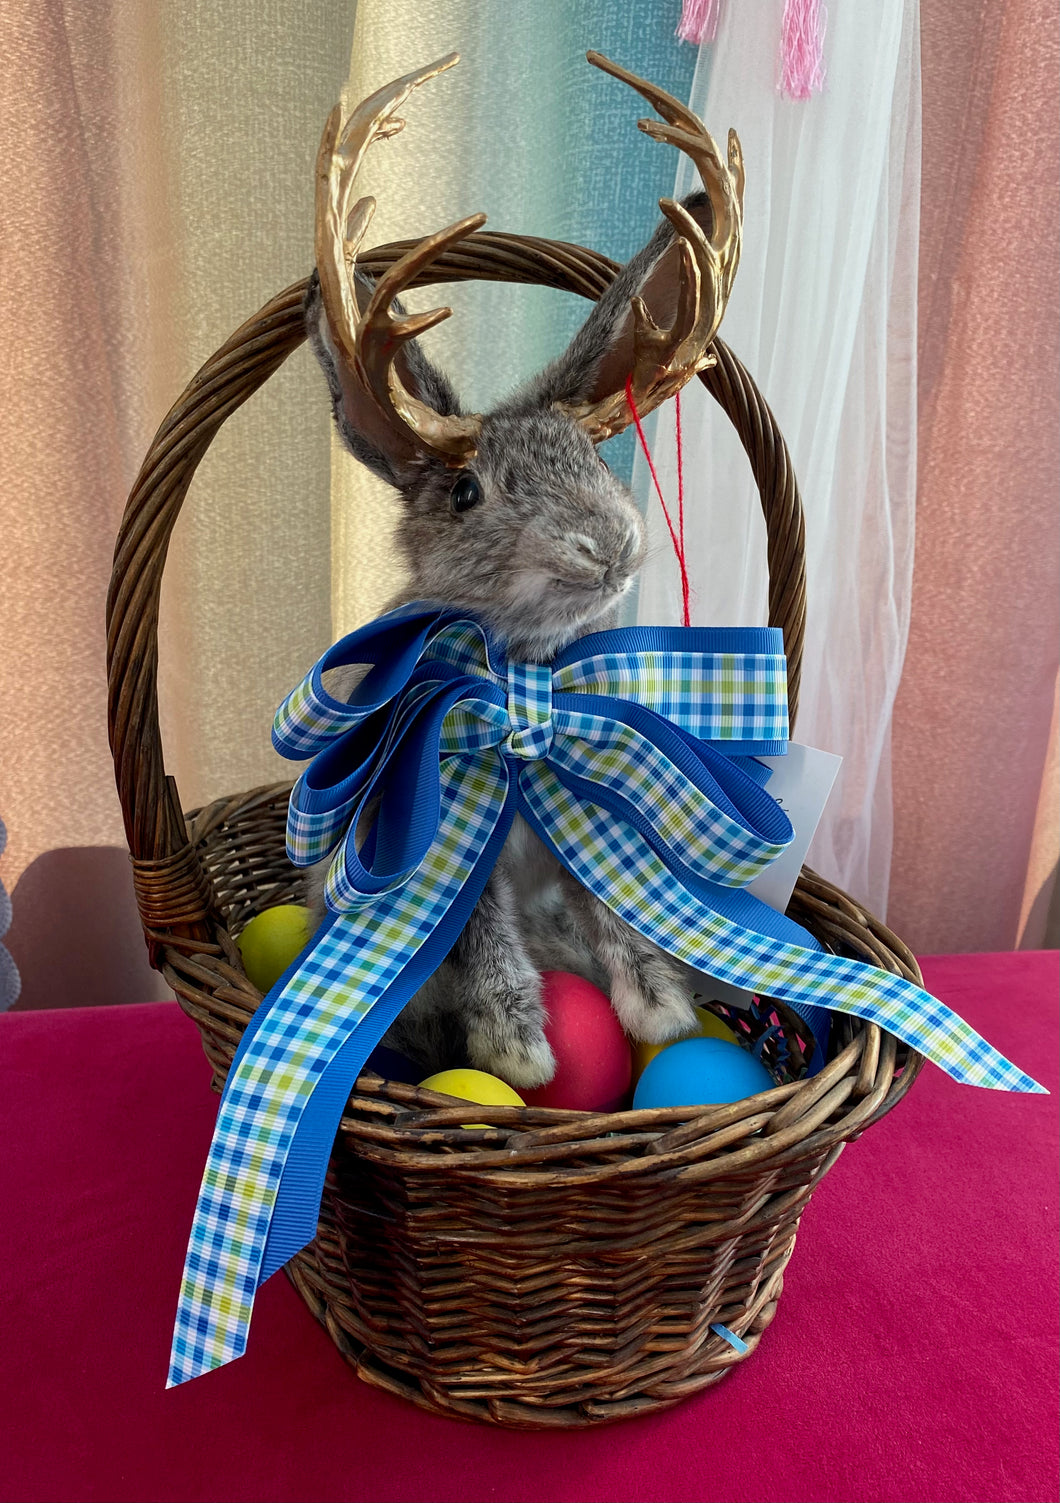 Jackalope Easter Bunny with Basket made by Emily Binard